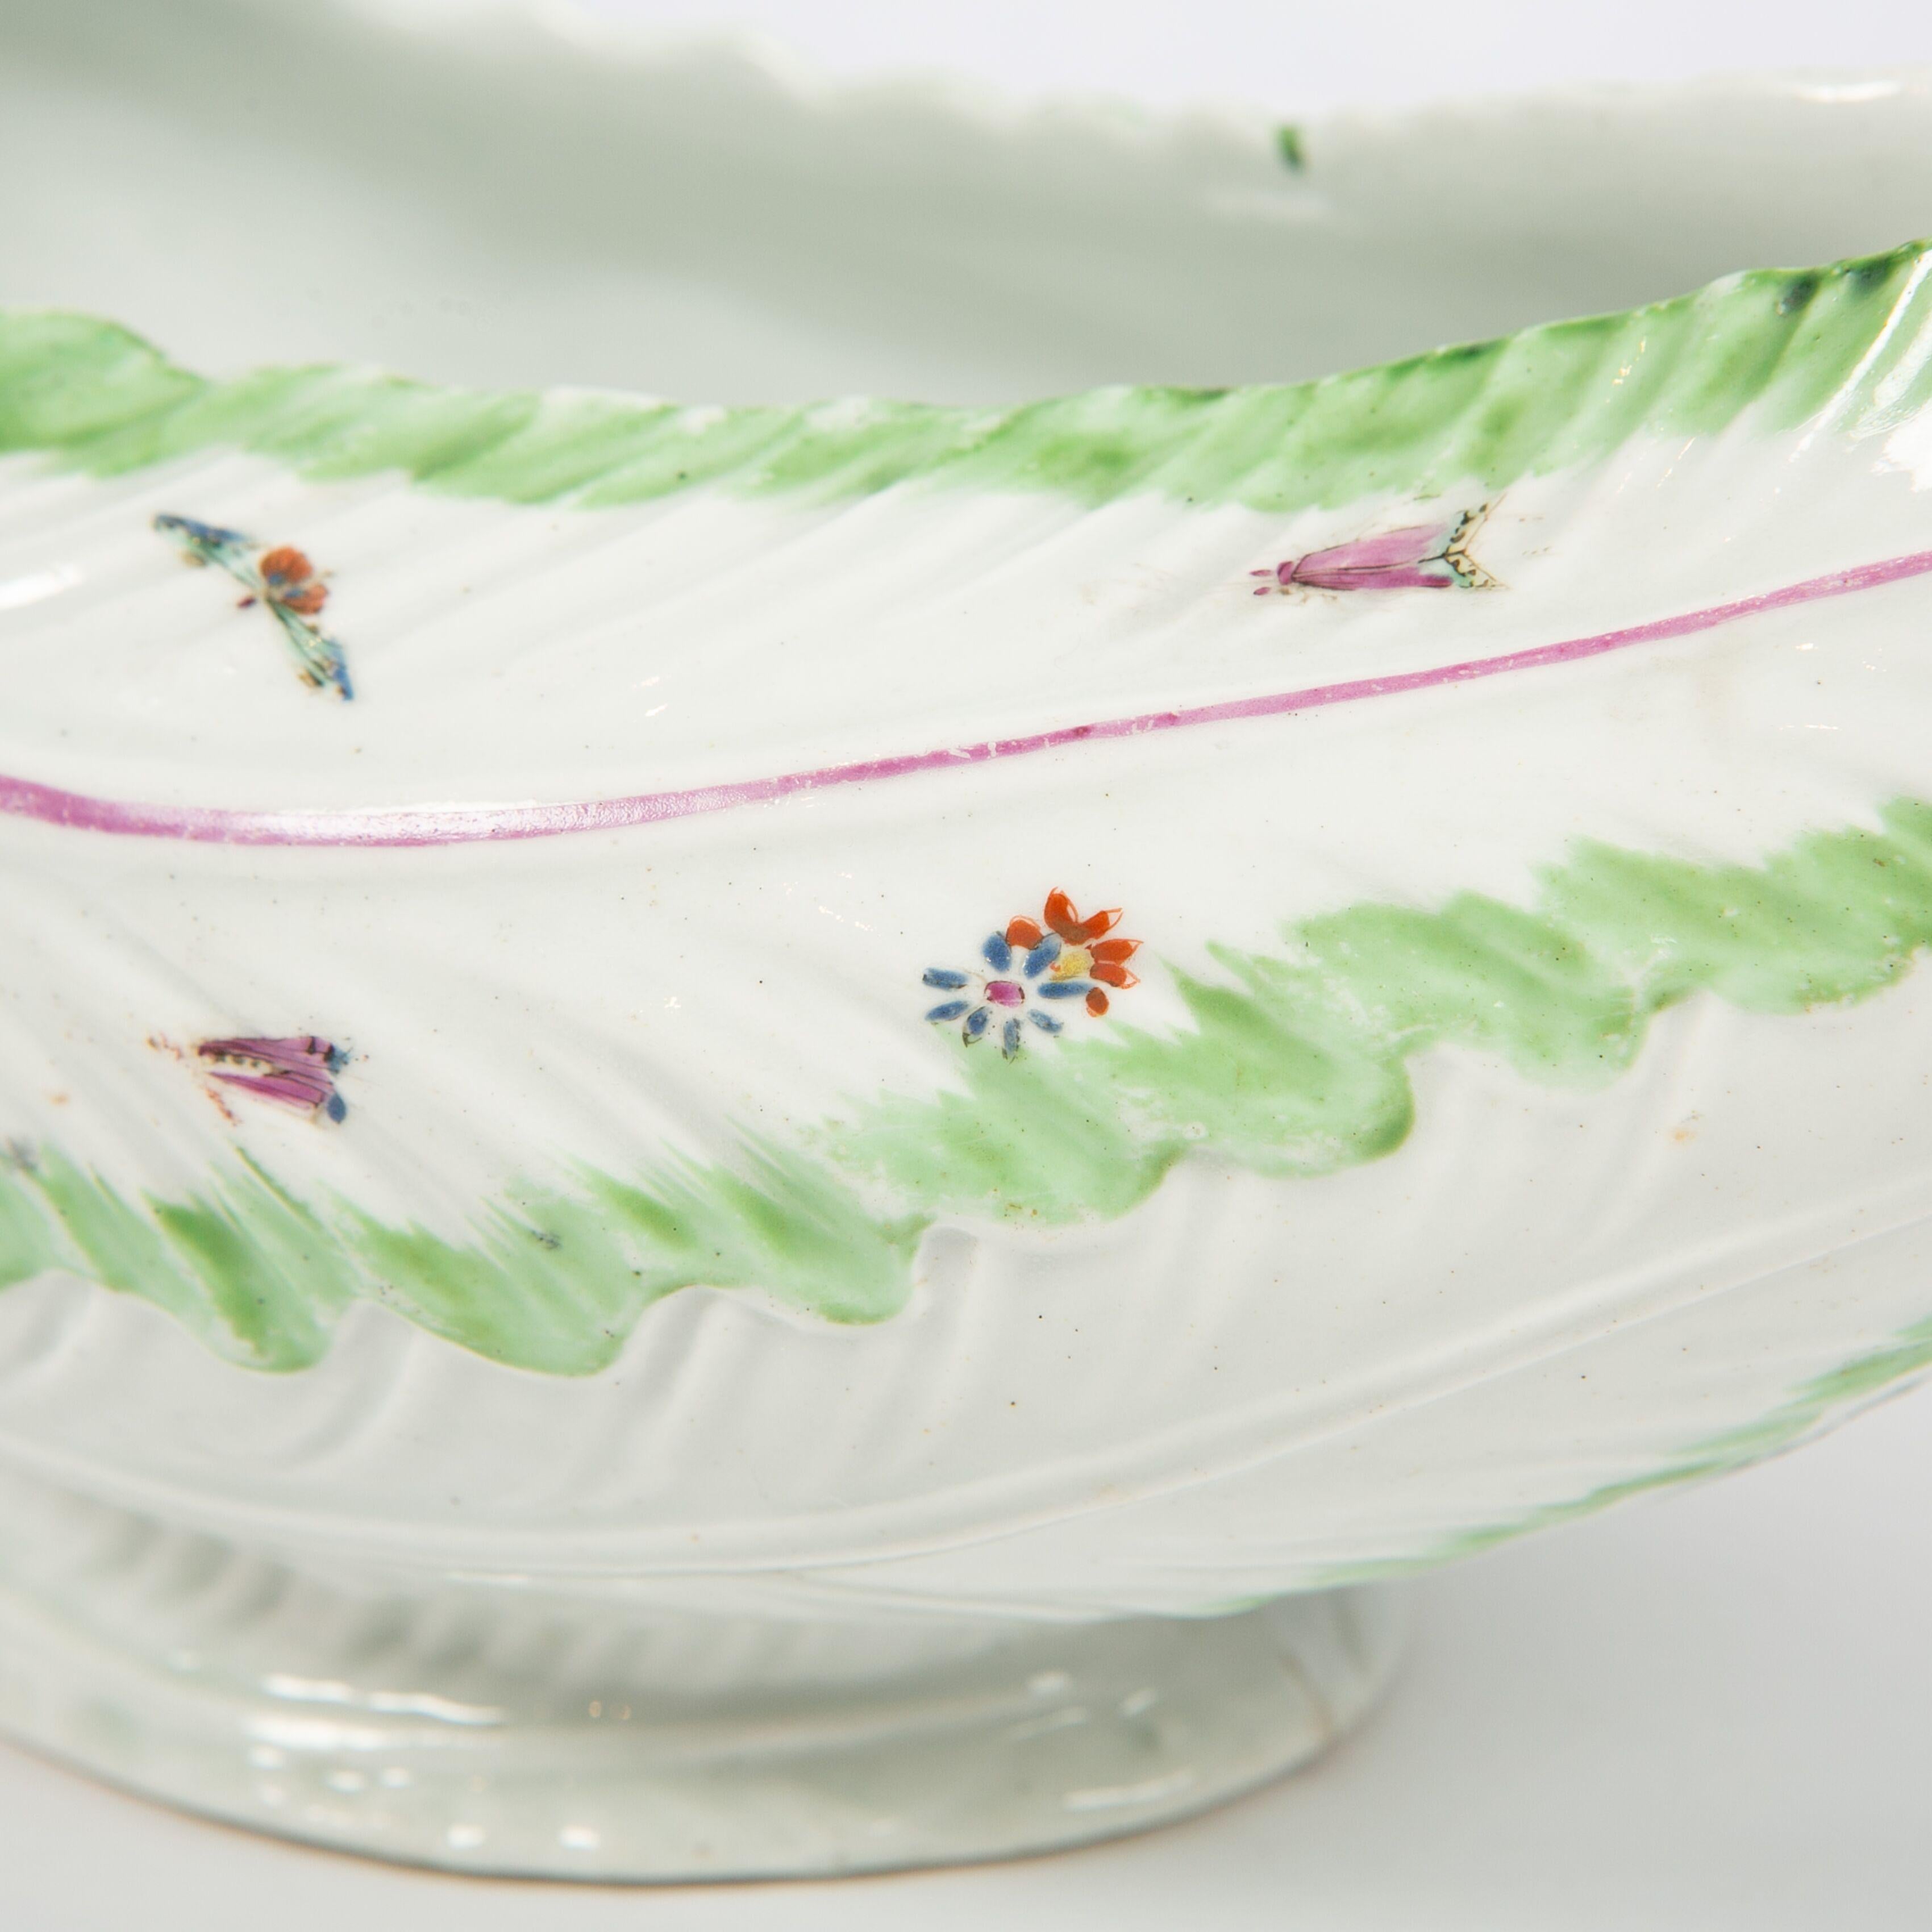 Some of the most exquisite English porcelain ever made was manufactured in the 18th century by a factory in Worcester founded by a group of investors, including Dr. John Wall. In the 1750s, they began to manufacture soft-paste porcelain at their